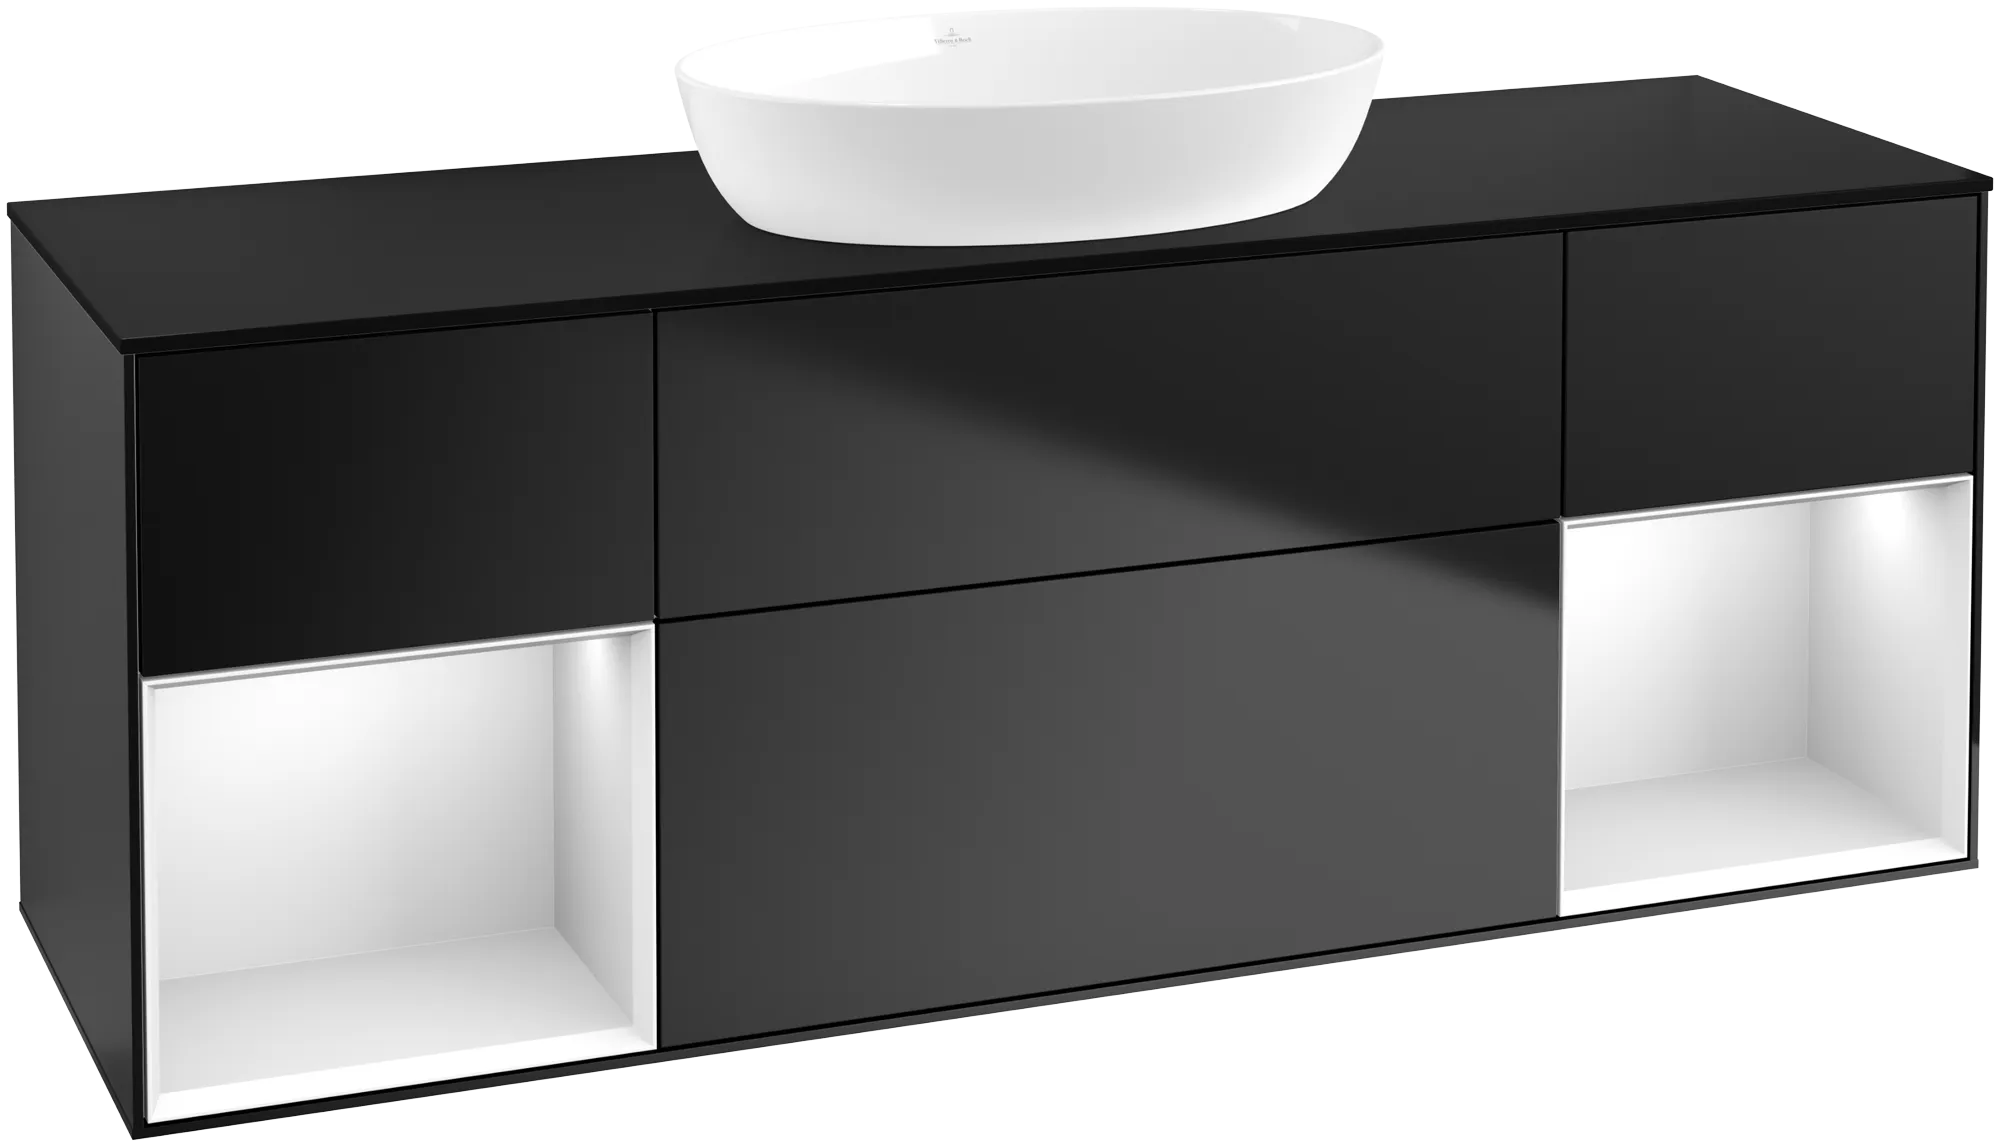 Picture of VILLEROY BOCH Finion Vanity unit, with lighting, 4 pull-out compartments, 1600 x 603 x 501 mm, Black Matt Lacquer / White Matt Lacquer / Glass Black Matt #FD02MTPD